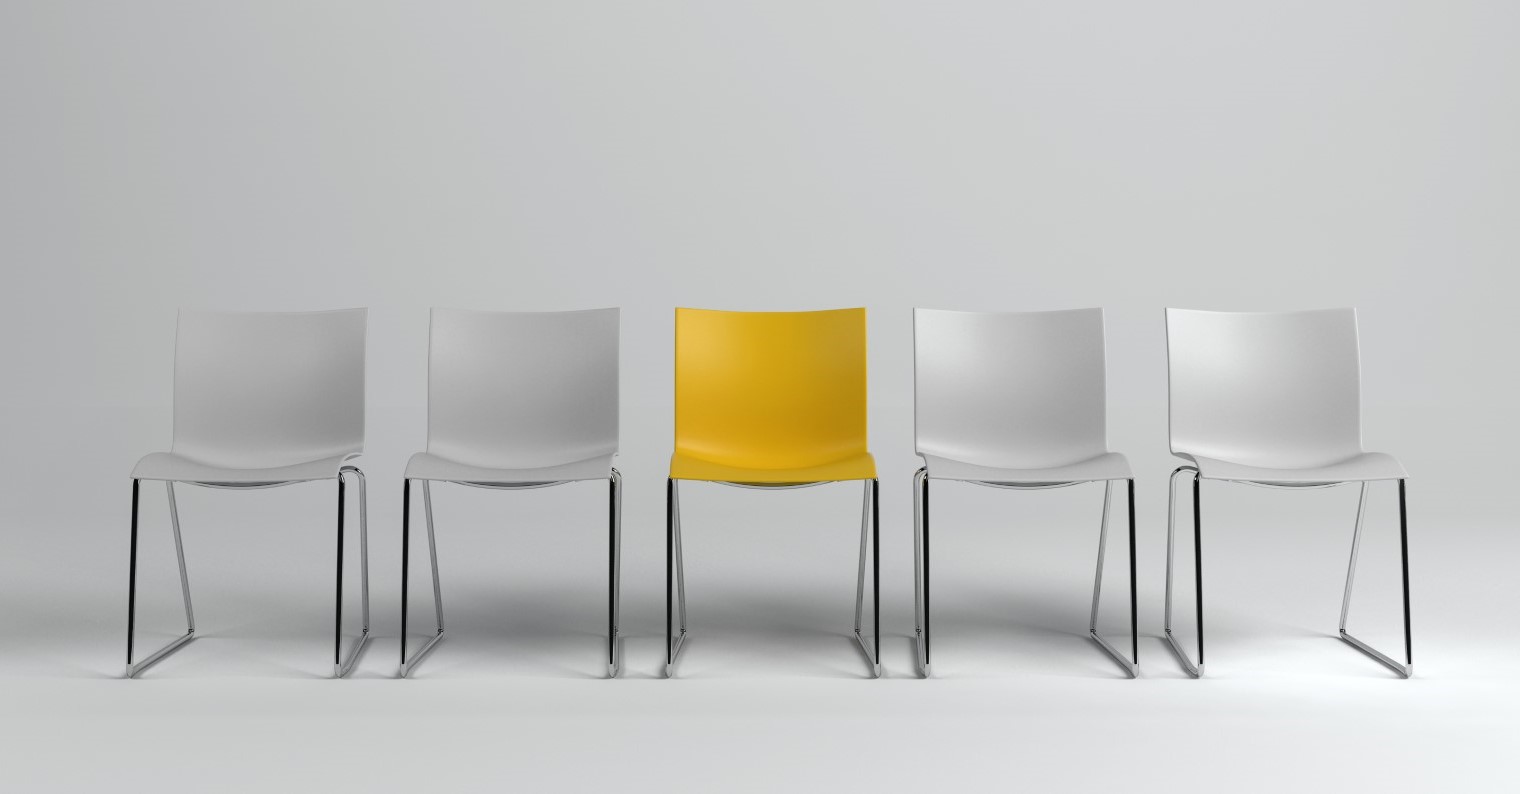 Row of empty white chairs with a distinctive yellow one in the middle, representing a standout choice in a business setting.